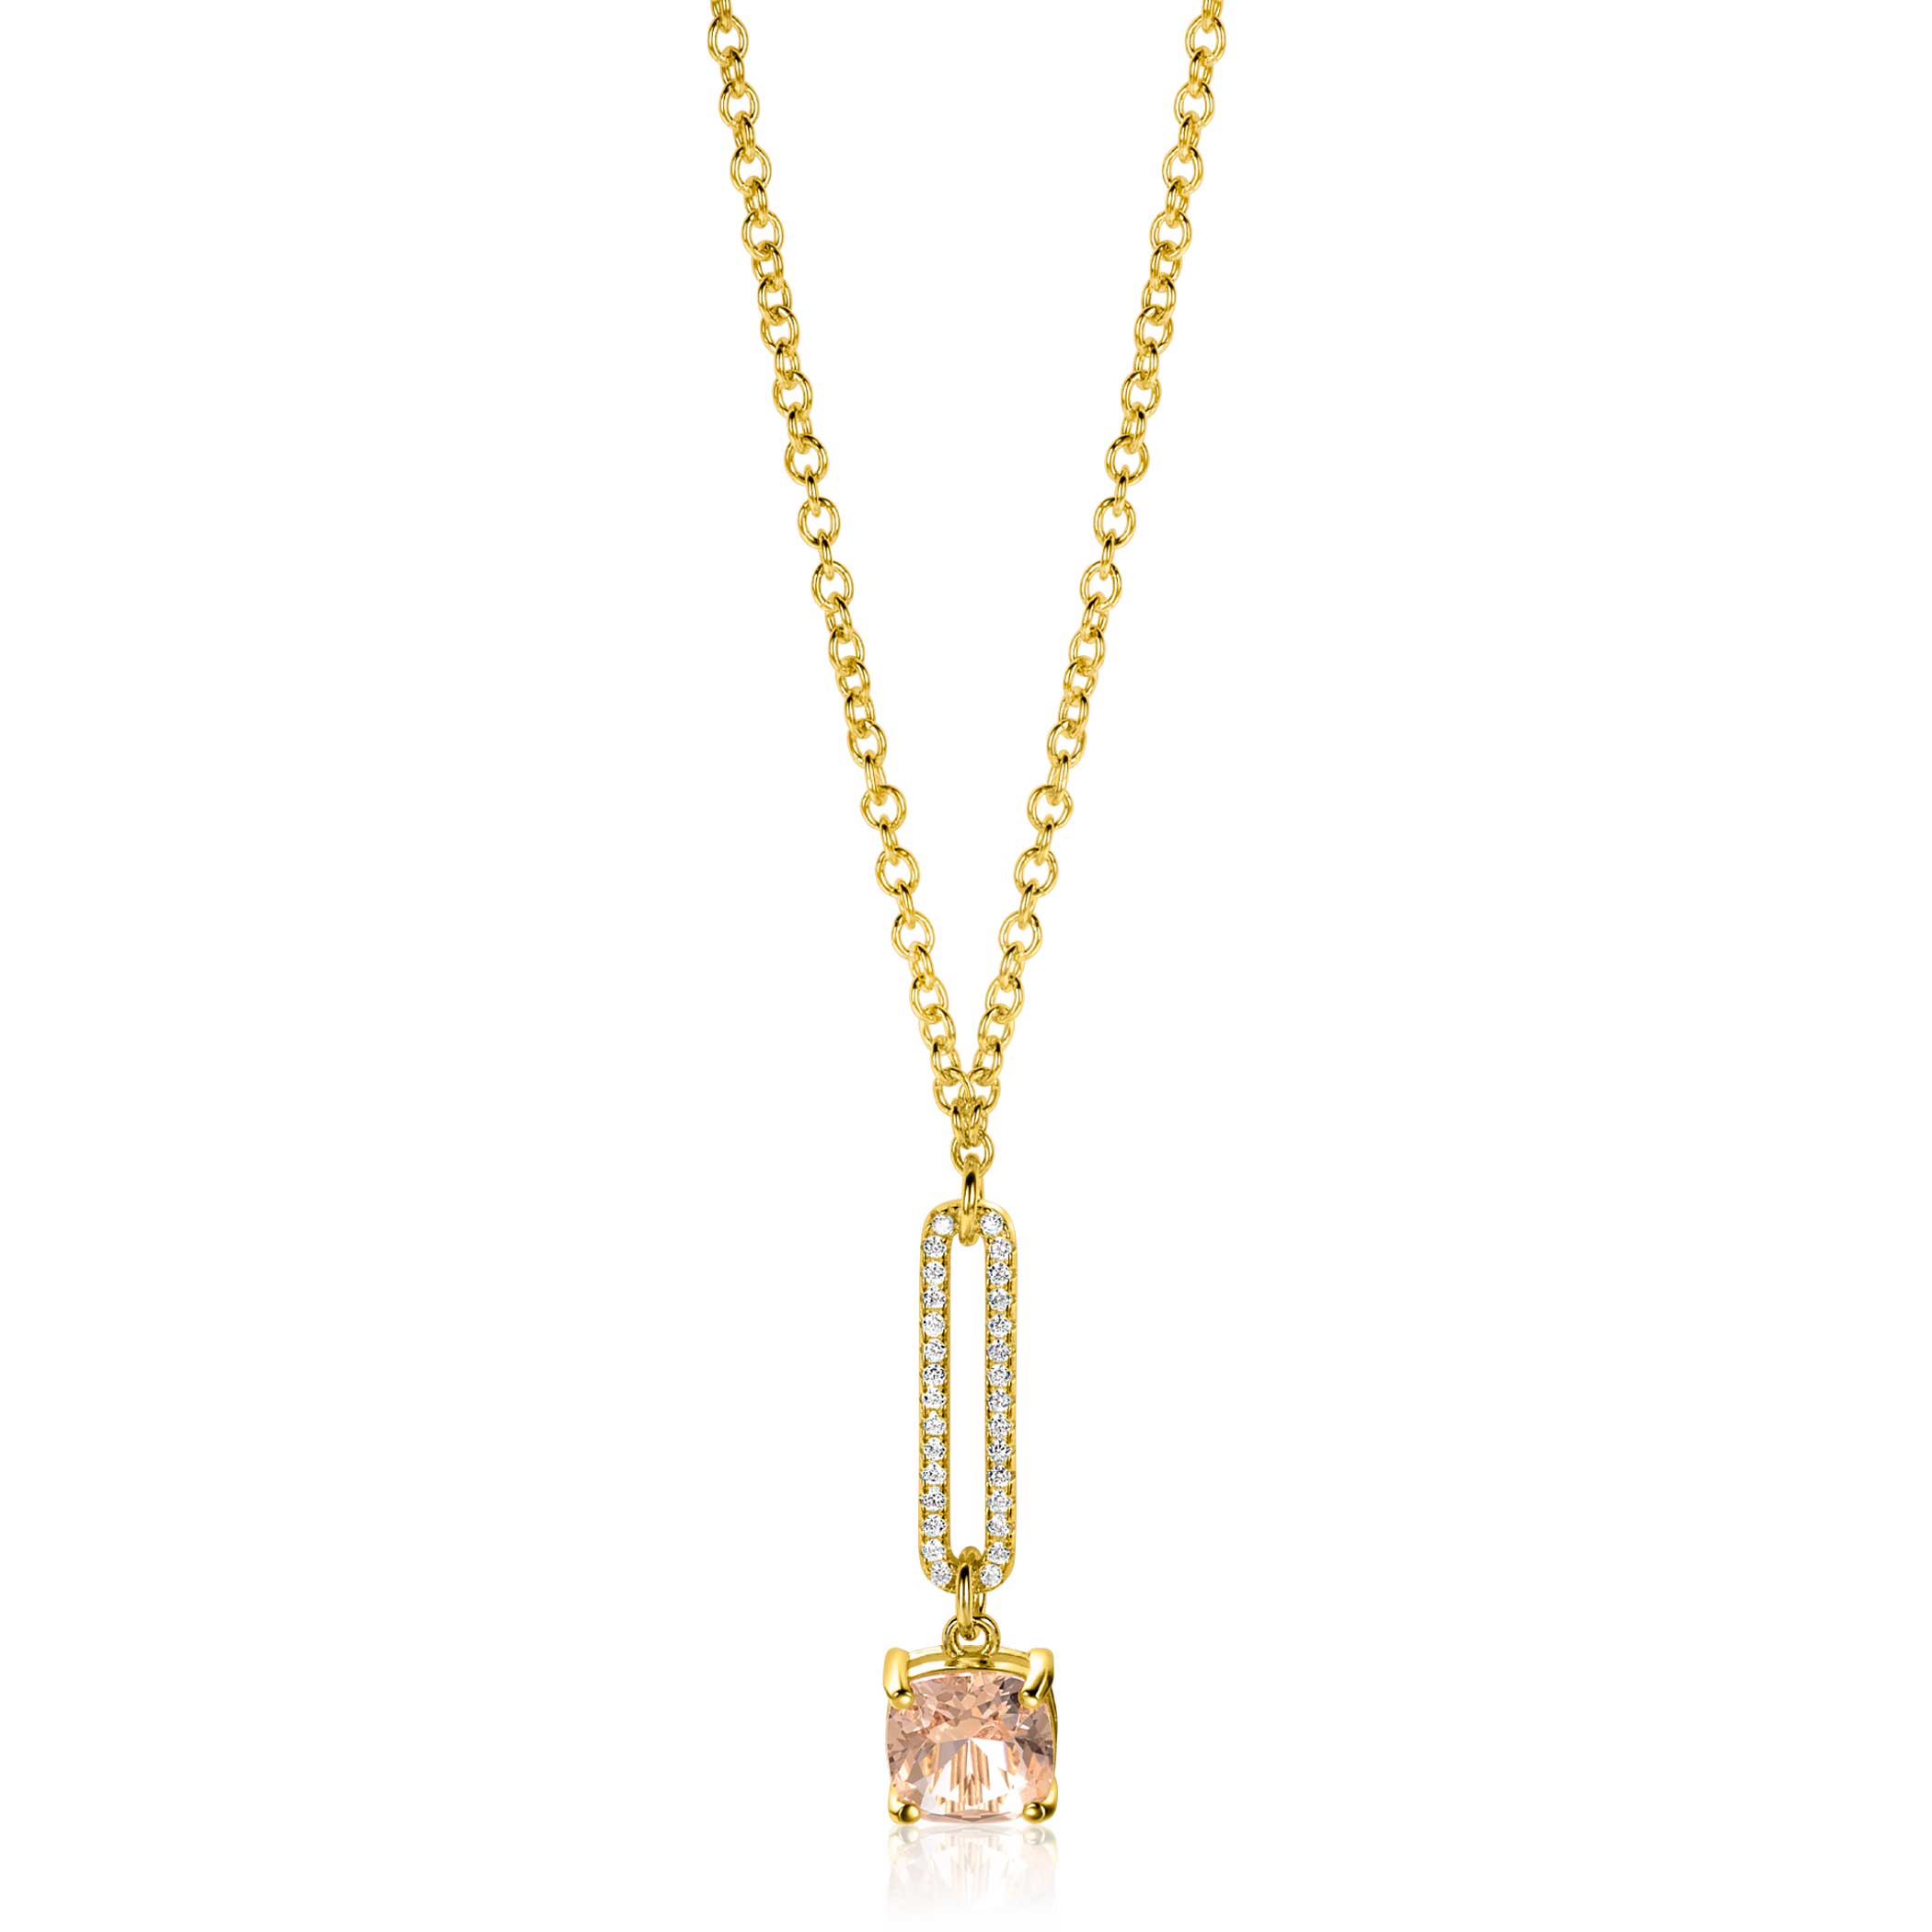 ZINZI gold plated silver belcher chain necklace with dazzling open oval shape and square pendant in light pink 42-45cm ZIC2579
